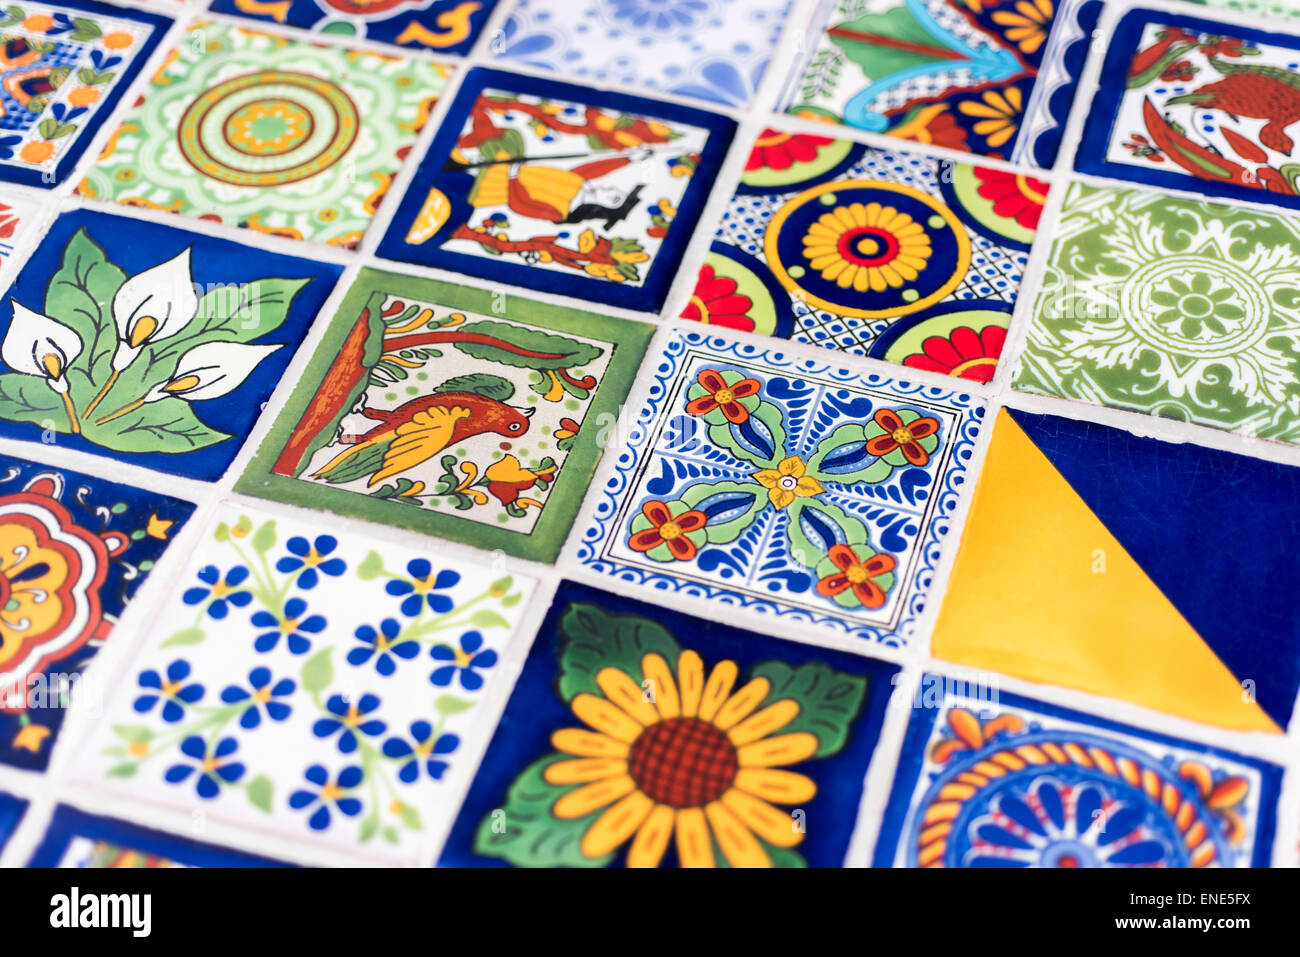 Mosaic assortment of Mexican hand painted tiles in pottery shop Stock Photo